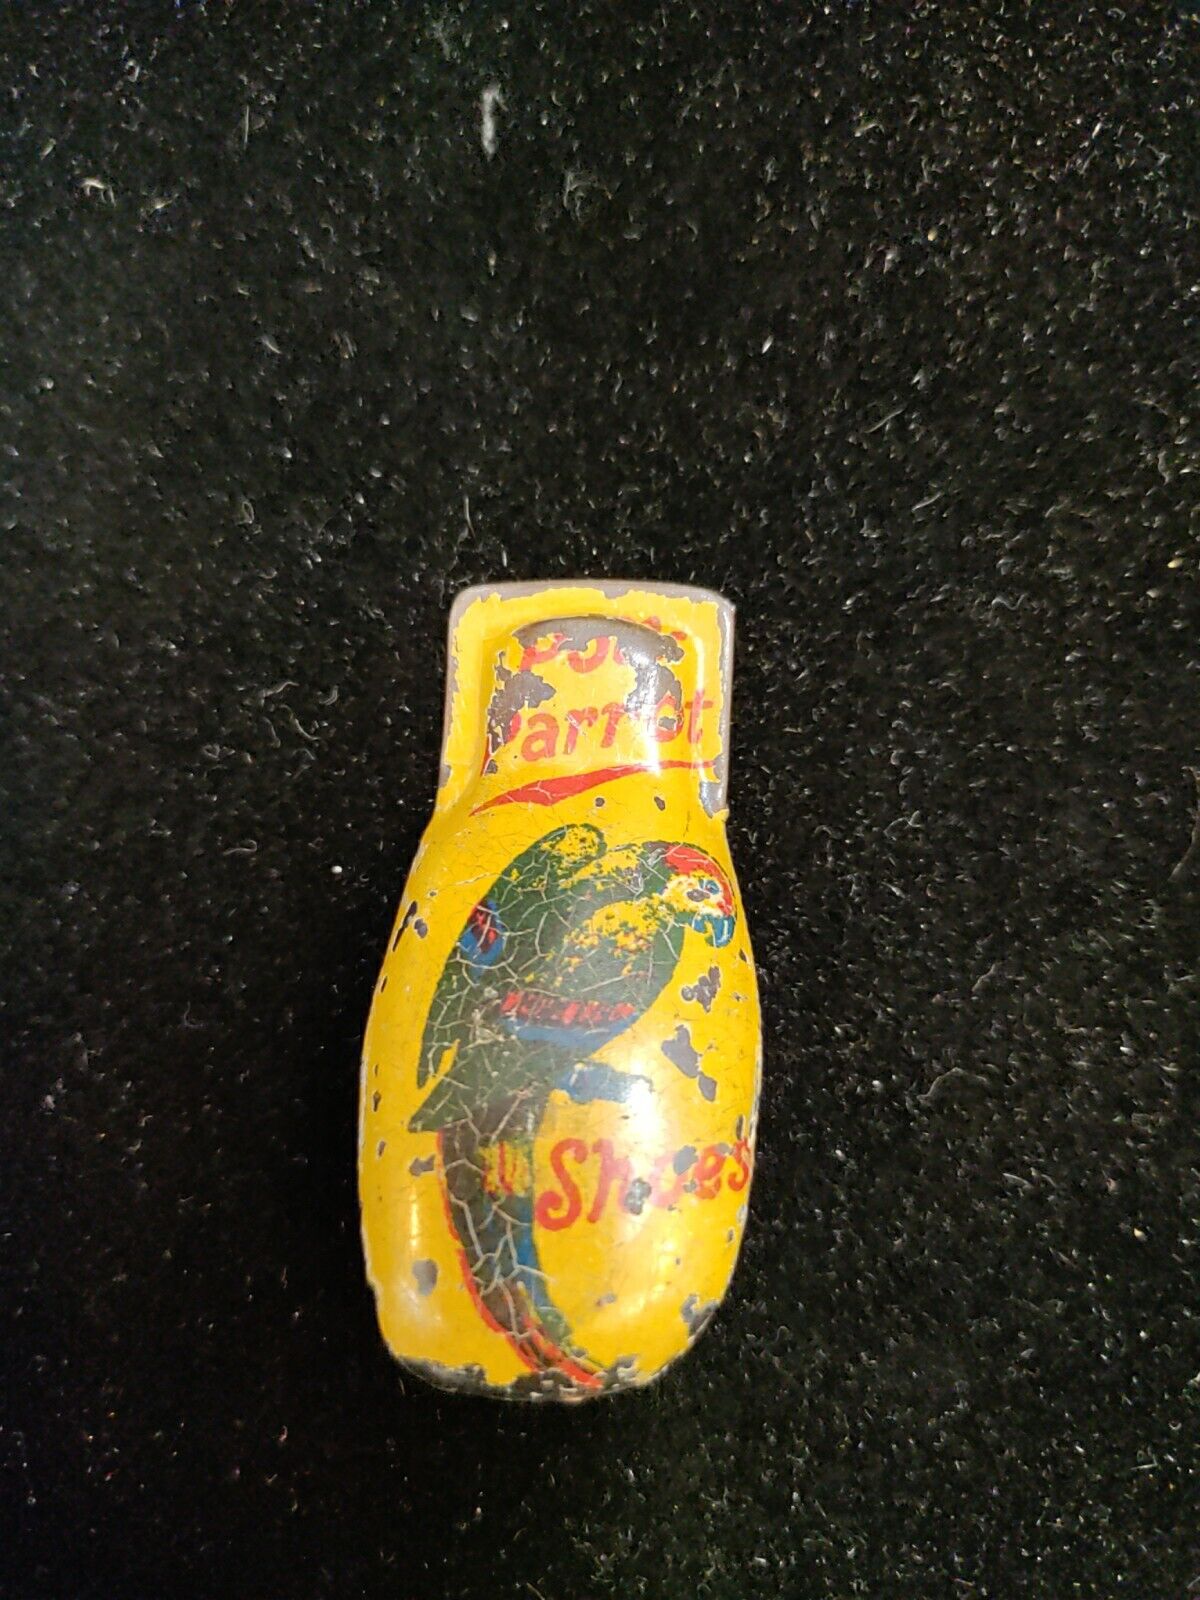 Antique Kirchhof tin toy clicker noisemaker advertising for Poll-Parrot Shoes 